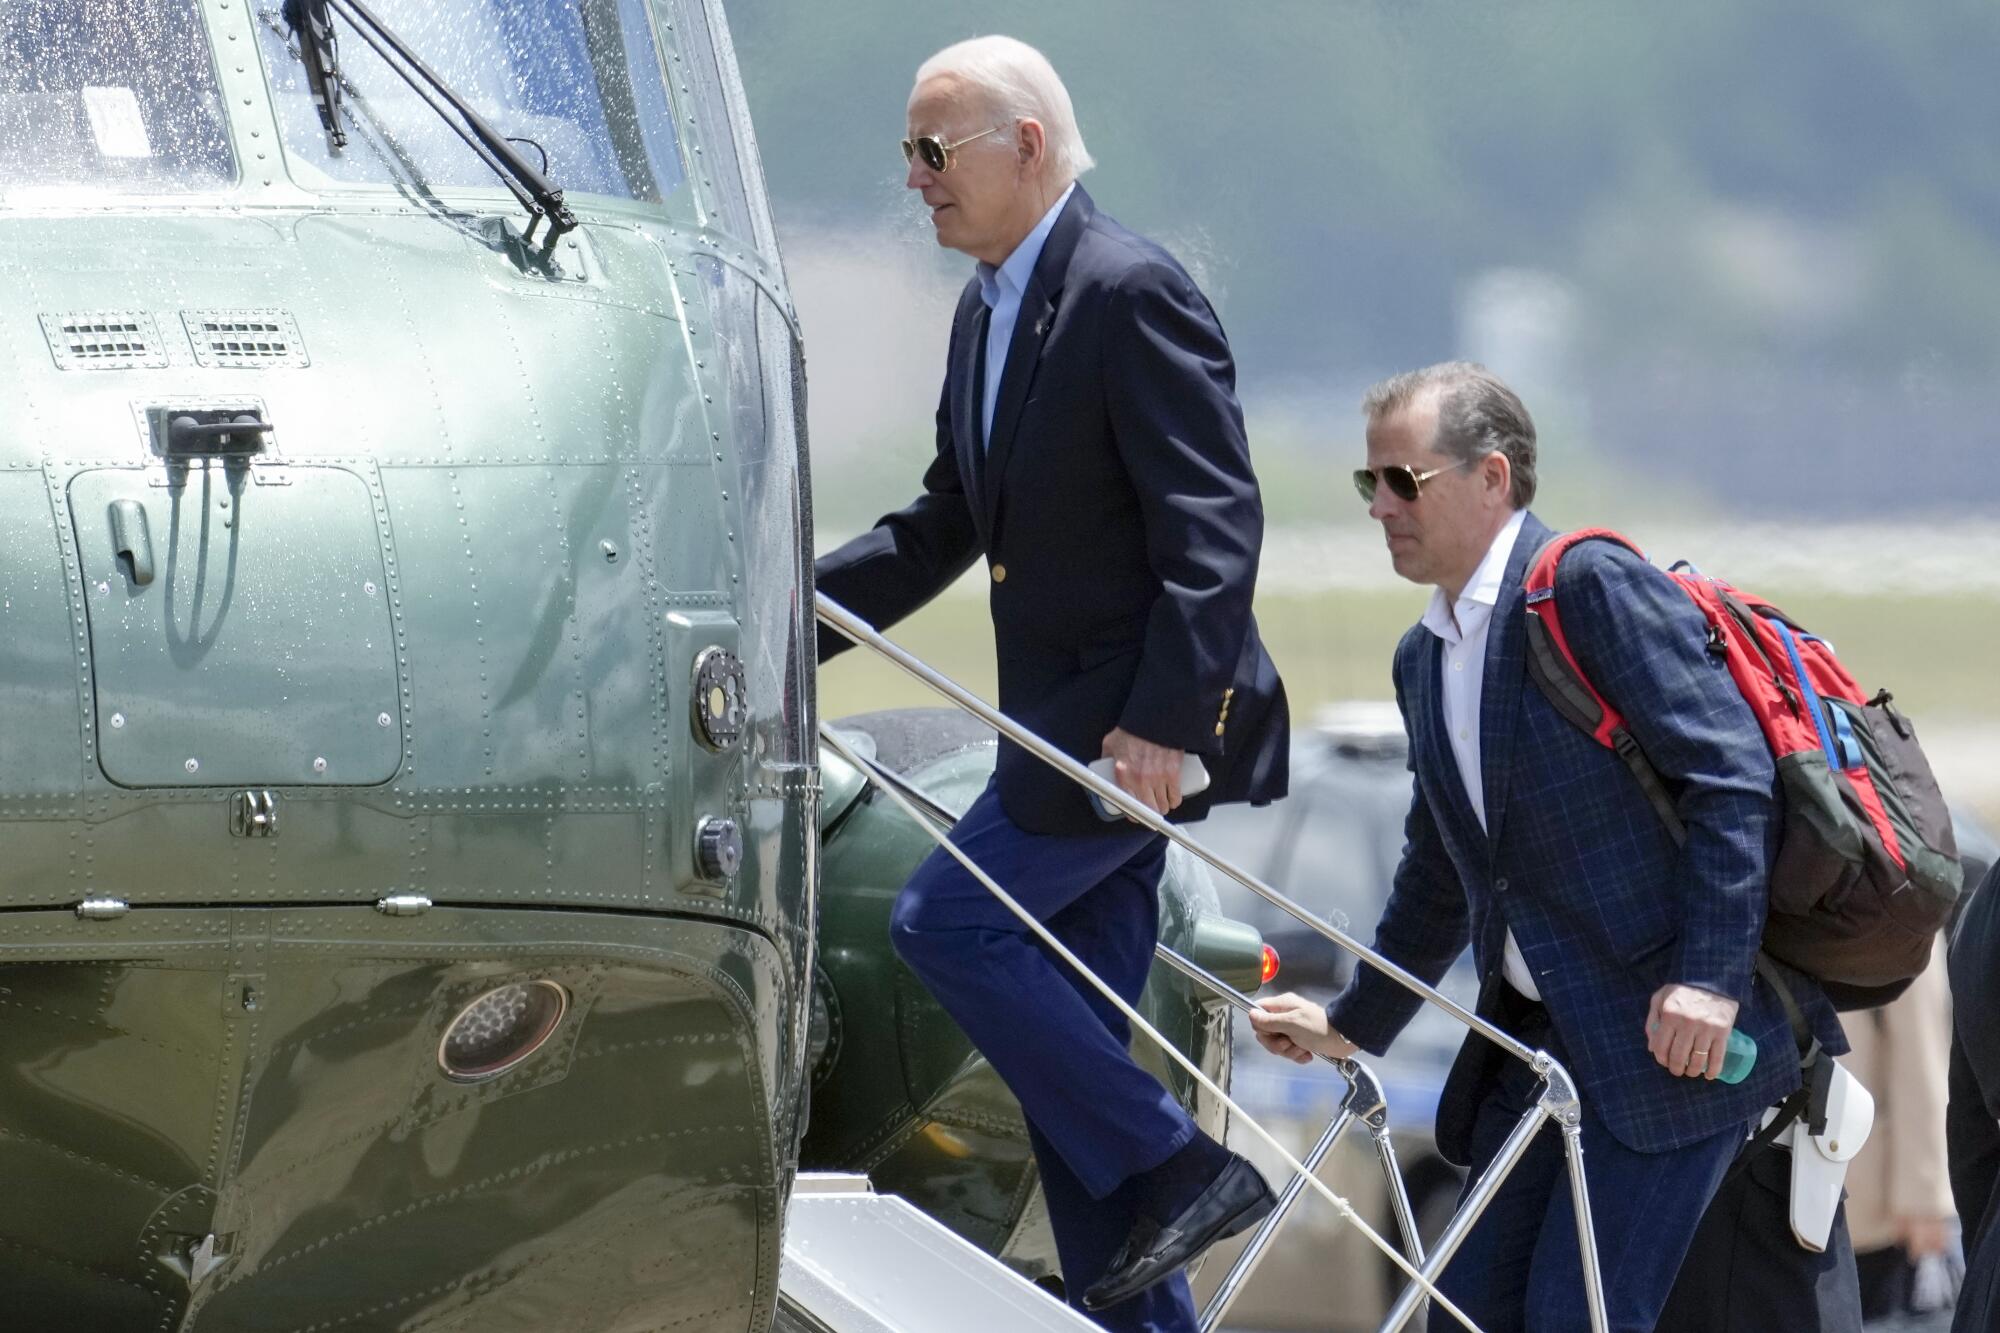 President Joe Biden boards Marine One with his son Hunter Biden as he leaves Andrews Air Force Base